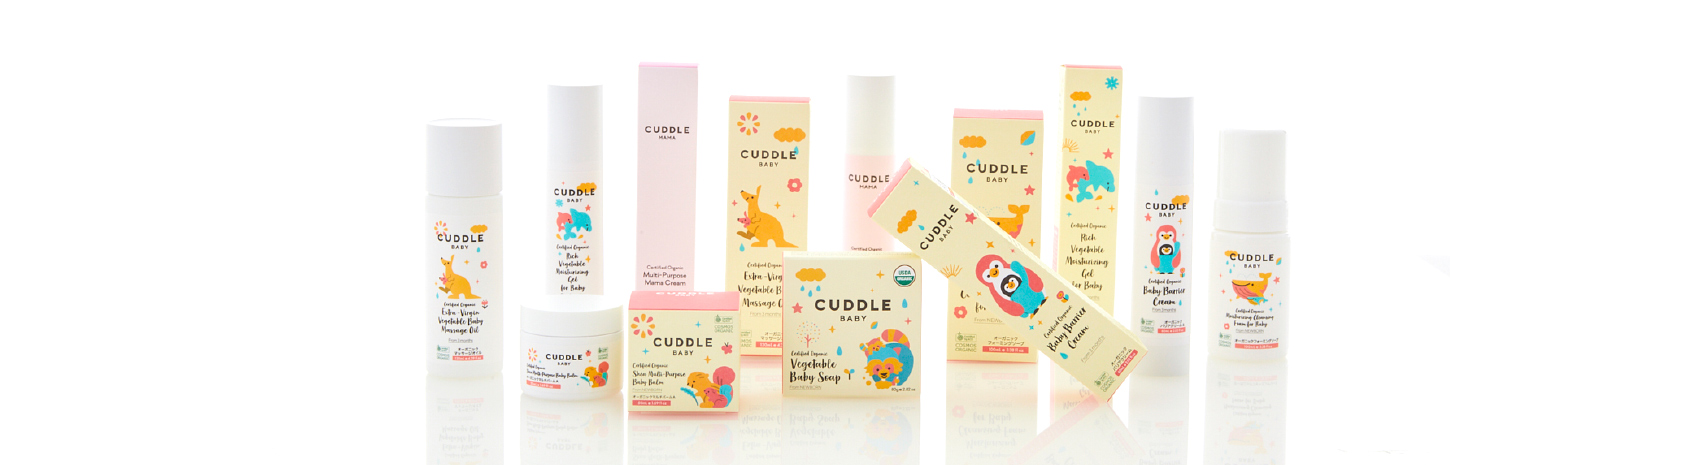 CUDDLE | Products